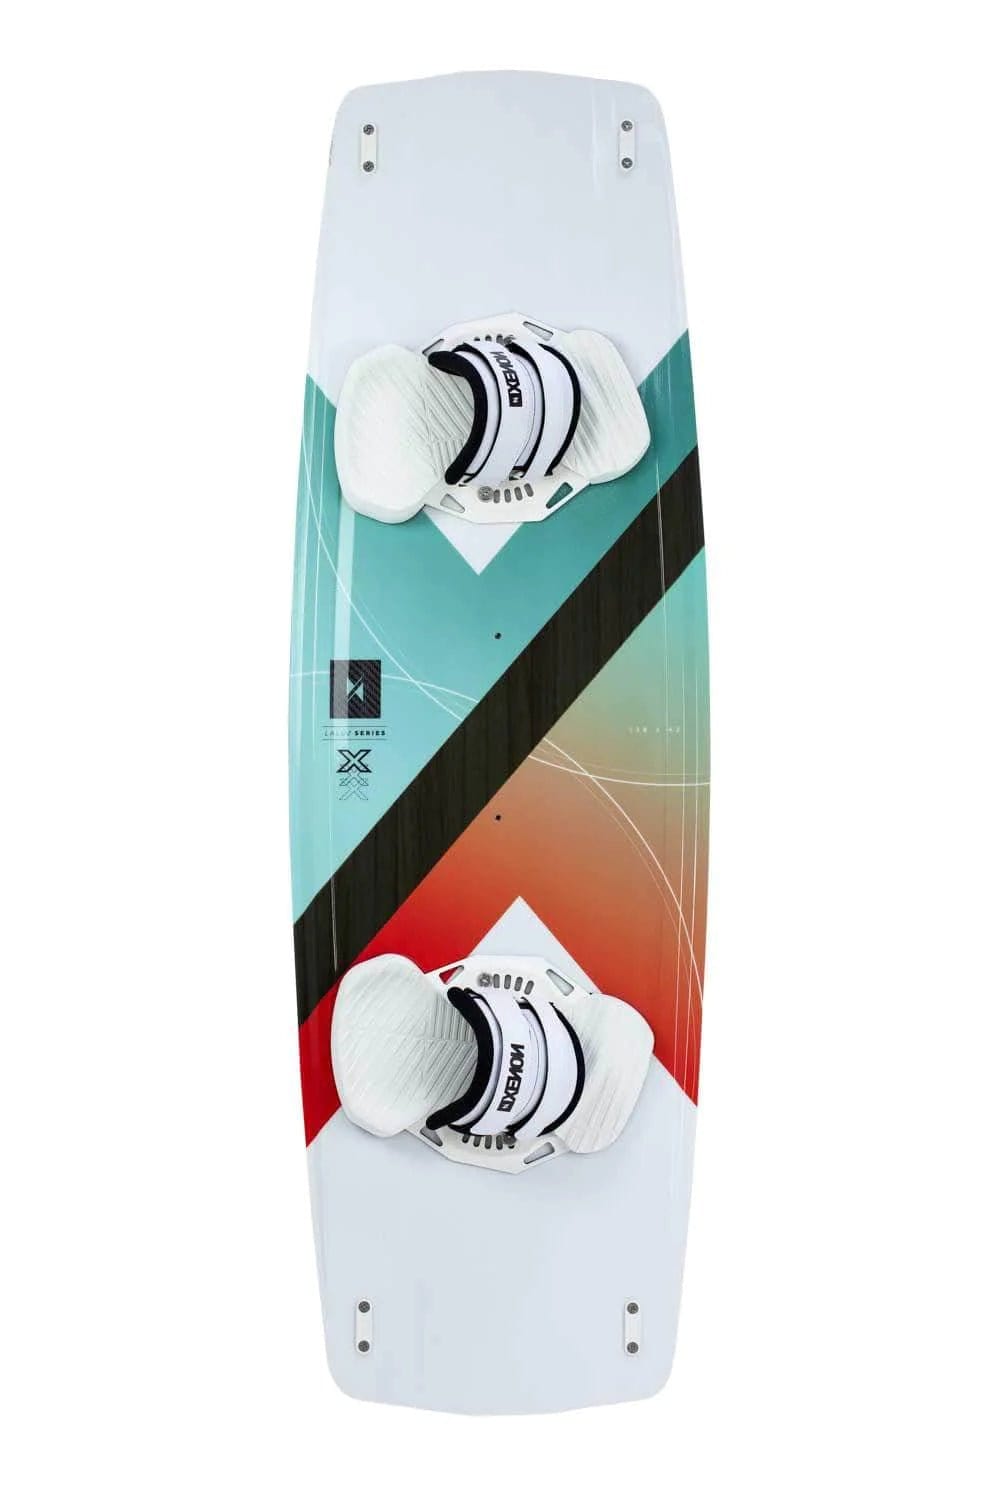 Core XR Pro Kitesurf Package Surface2Air Sports